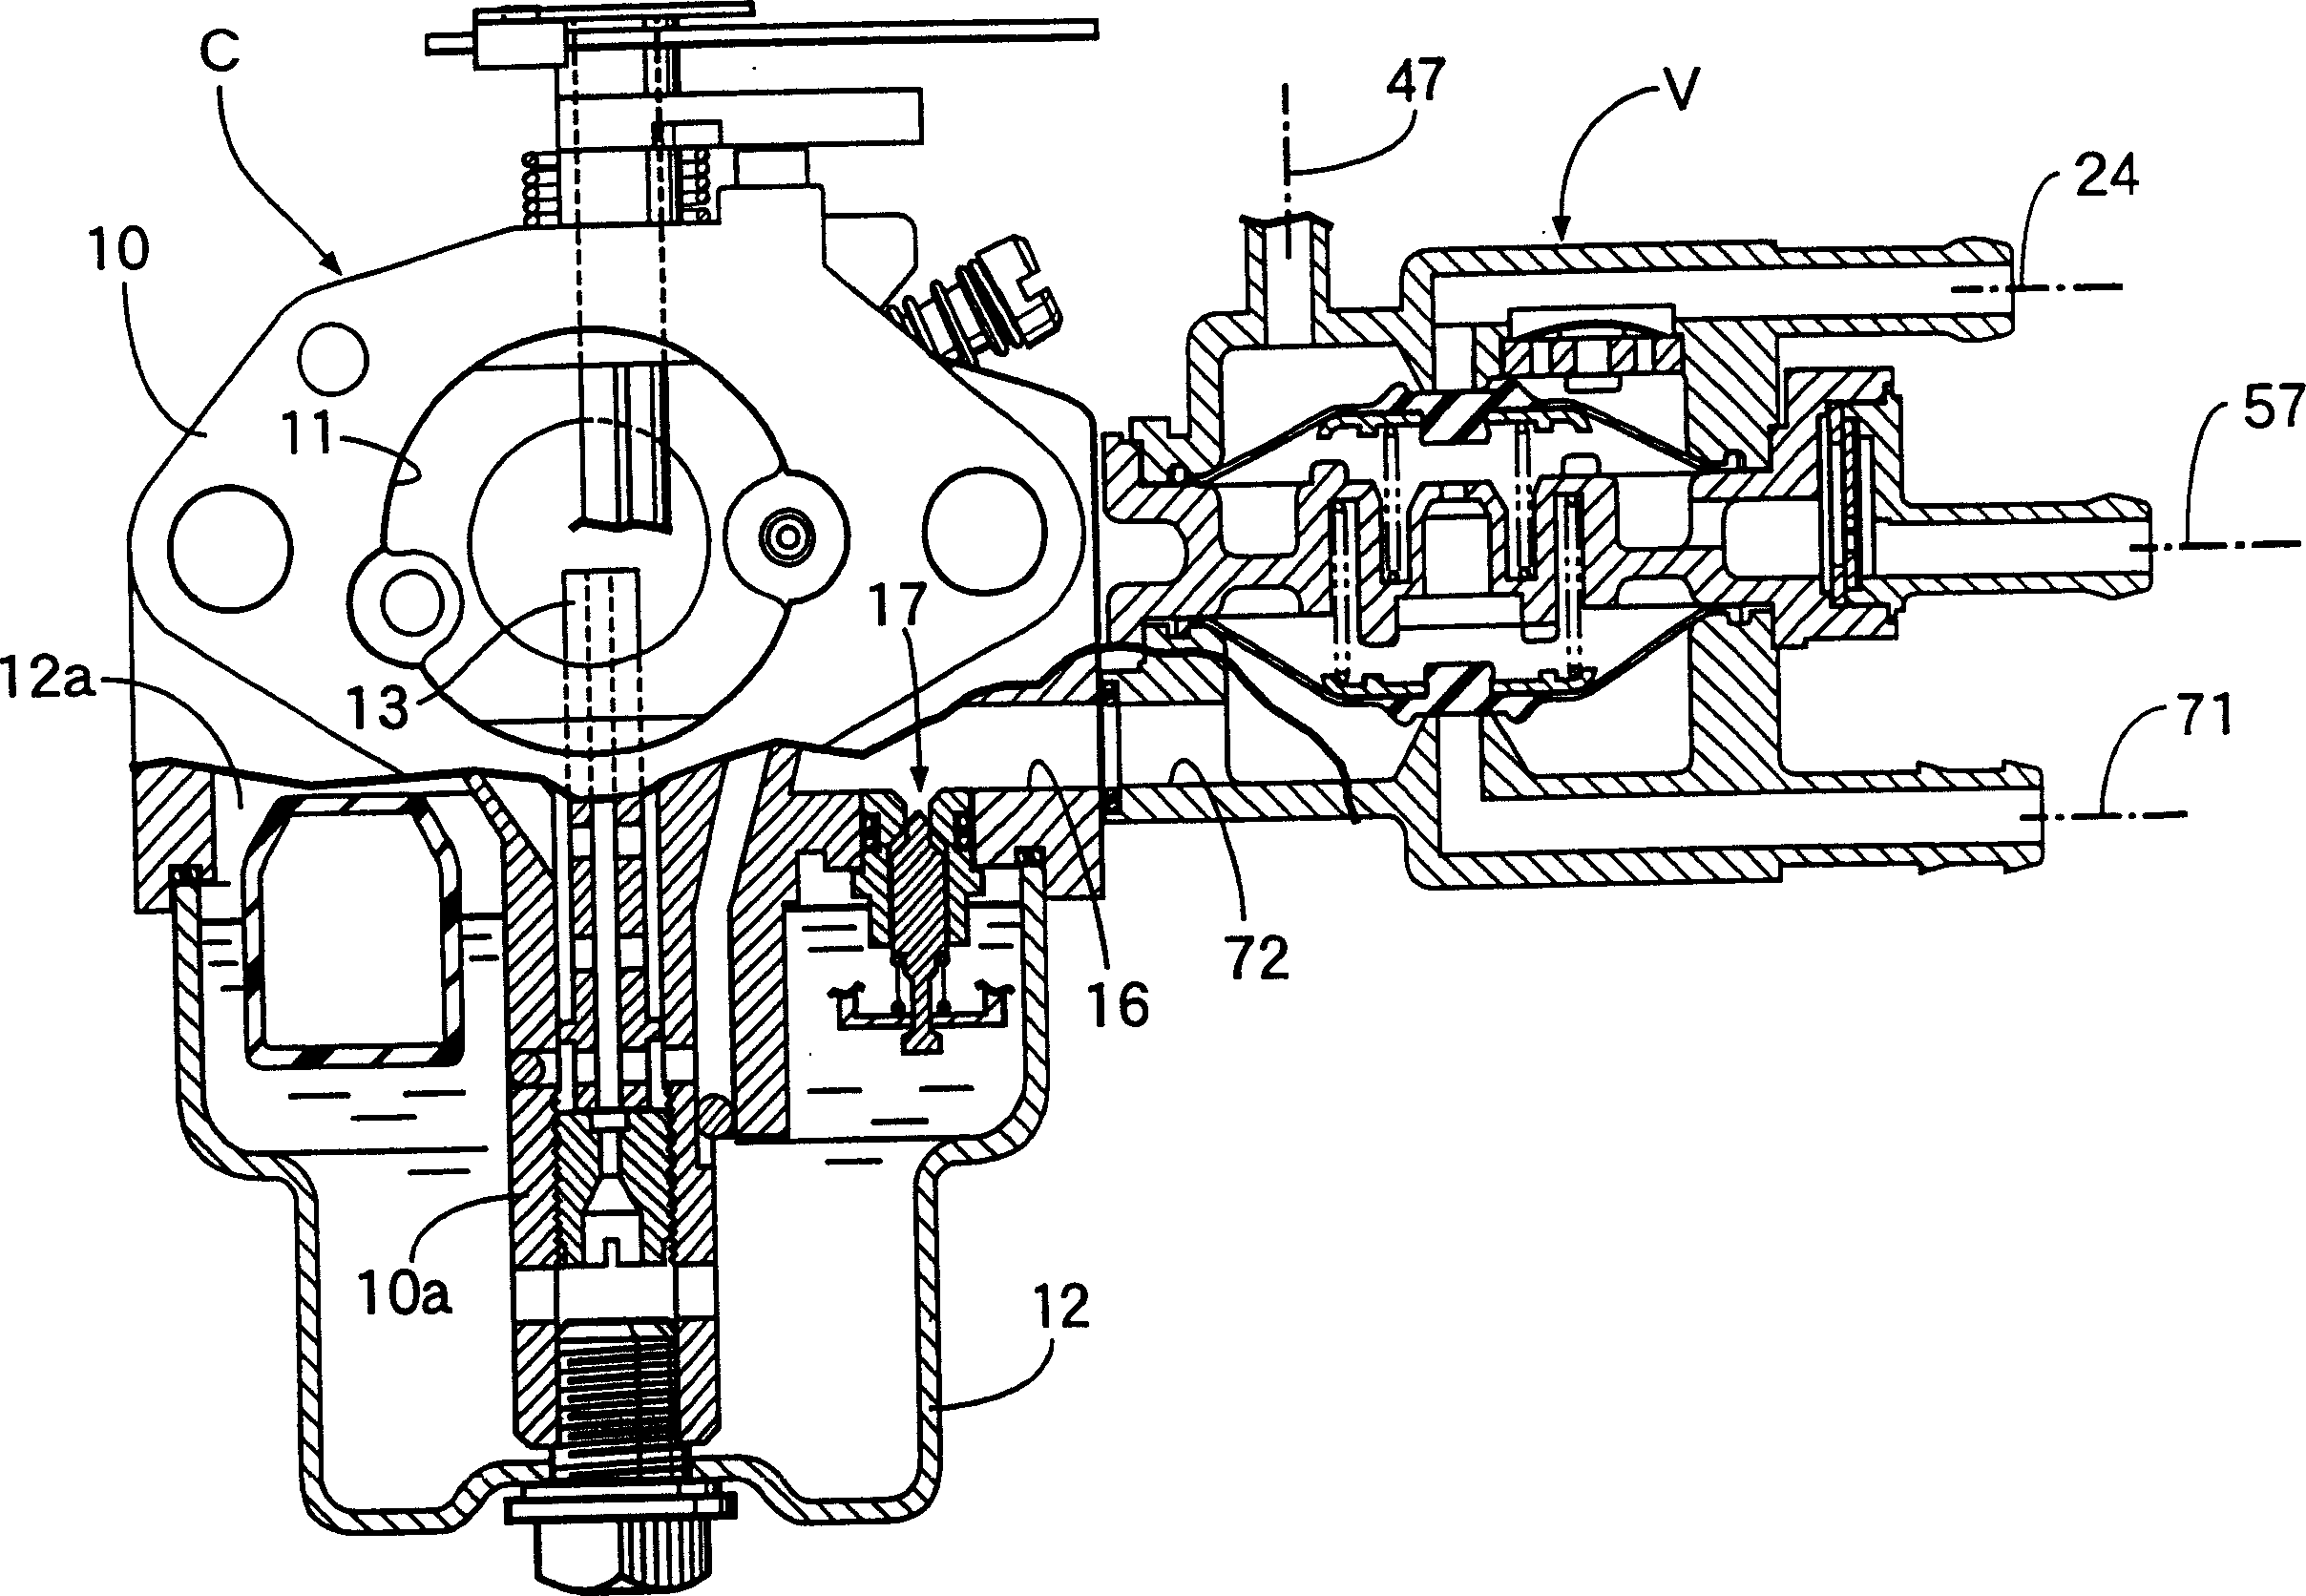 Fuel supply control system for engine